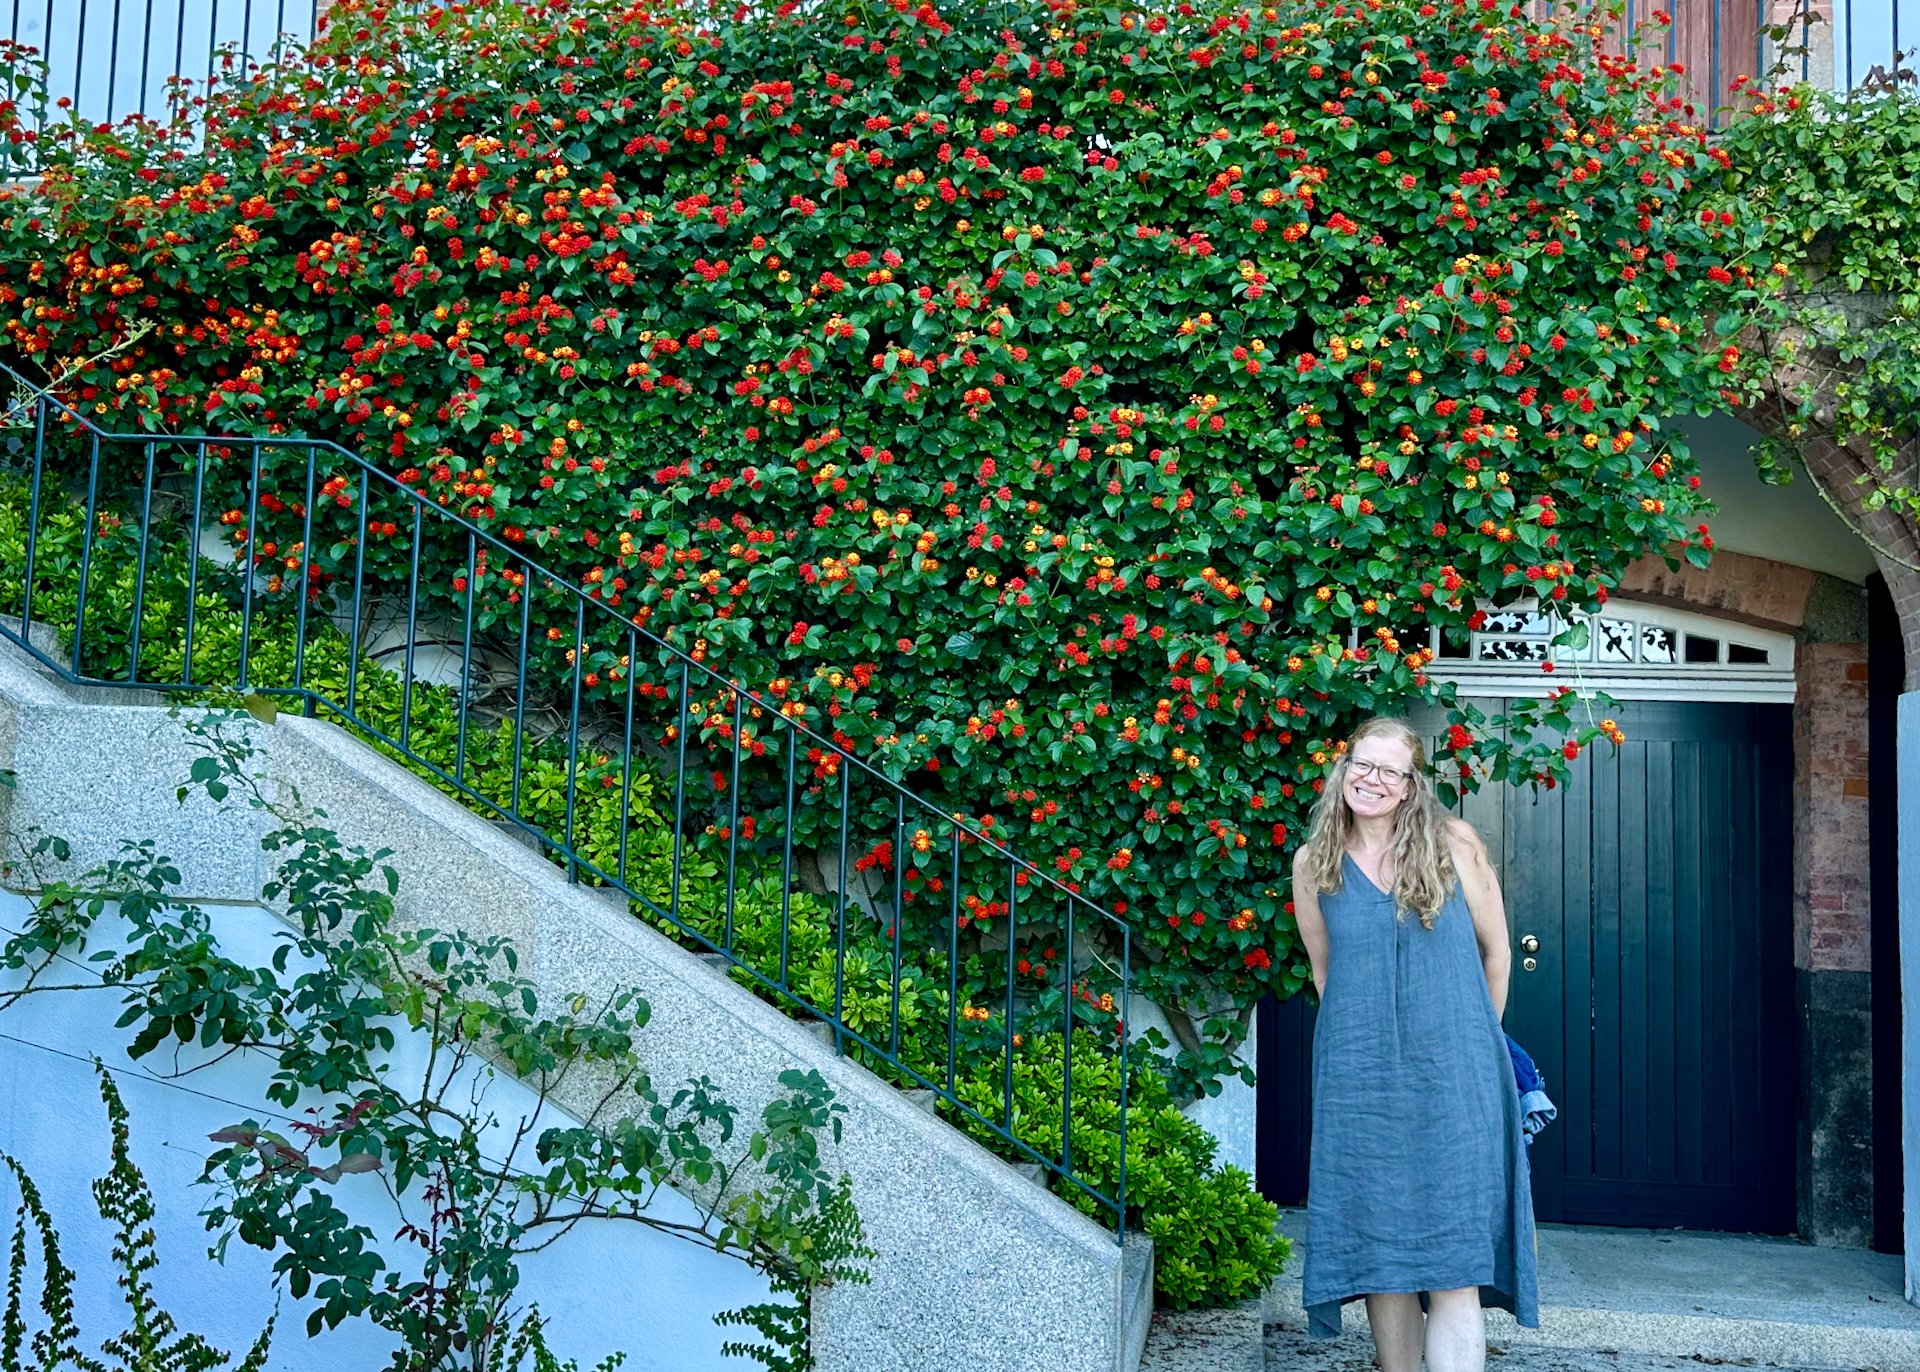  Outside, Justine found a huge bush of her favorite flowers.  